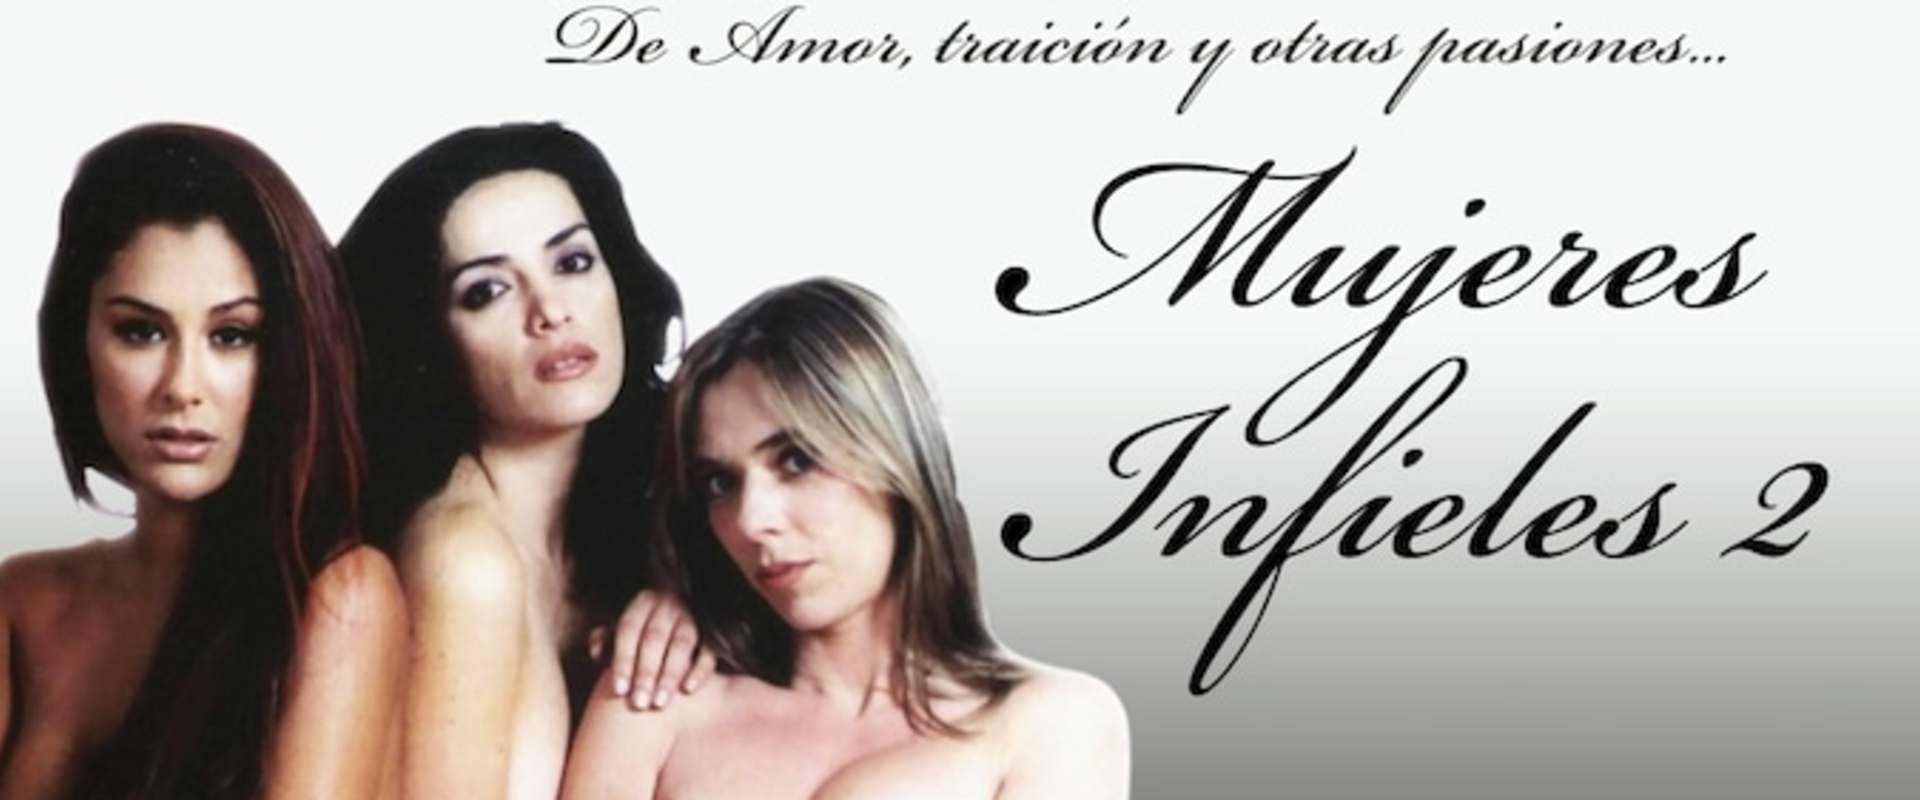 Mujeres Infieles 2 background 2